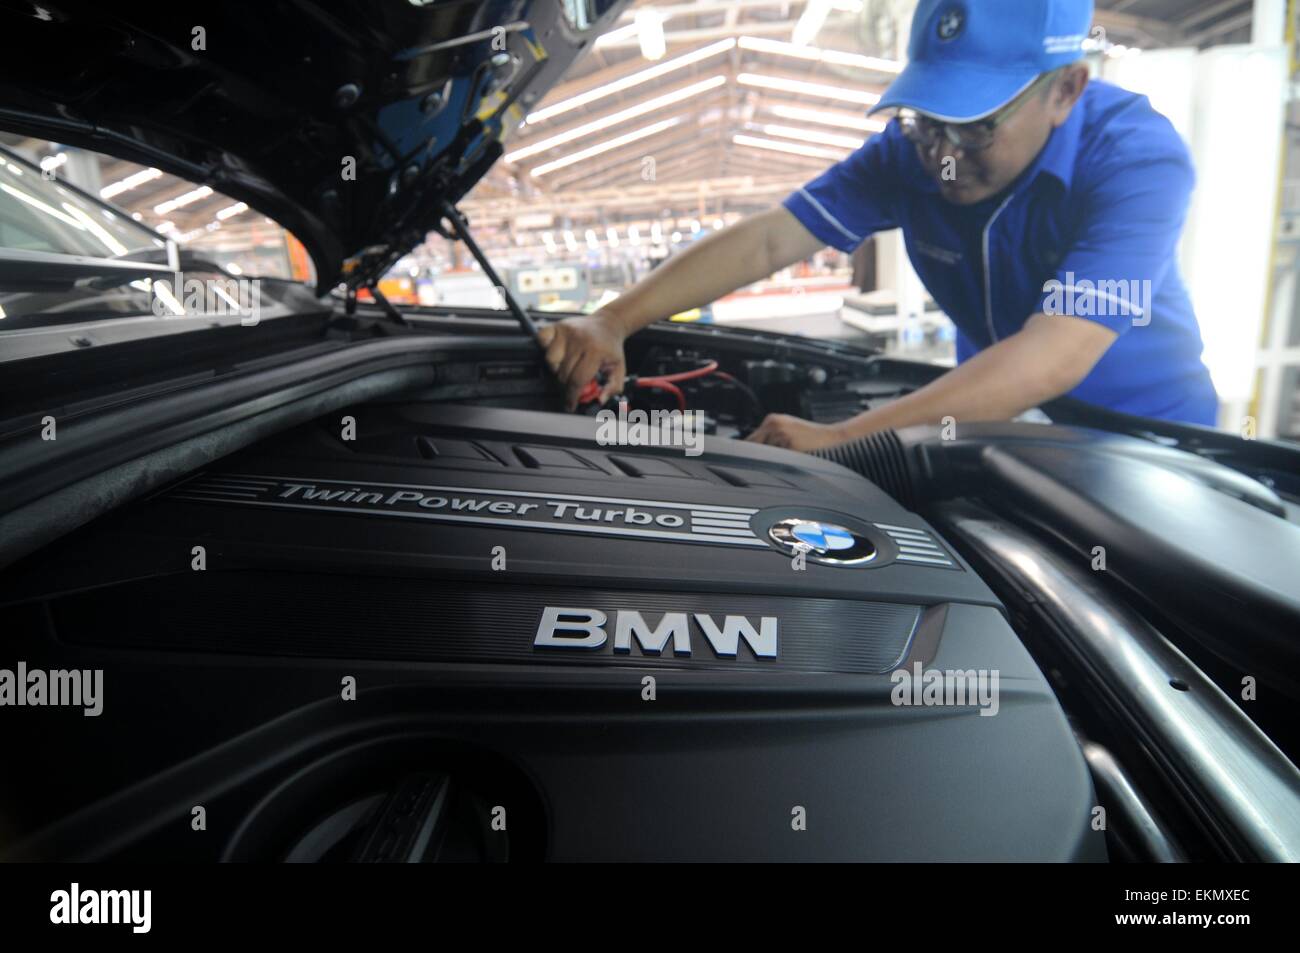 Jakarta, Indonesia. 10th Apr, 2015. JAKARTA, INDONESIA - APRIL 13 : Workers assemble the third generation of BMW X5 Advance Diesel automobile on the production line at the Bayerische Motoren Werke (BMW) factory on April 10, 2015 in Jakarta, Indonesia. © Sijori Images/ZUMA Wire/Alamy Live News Stock Photo